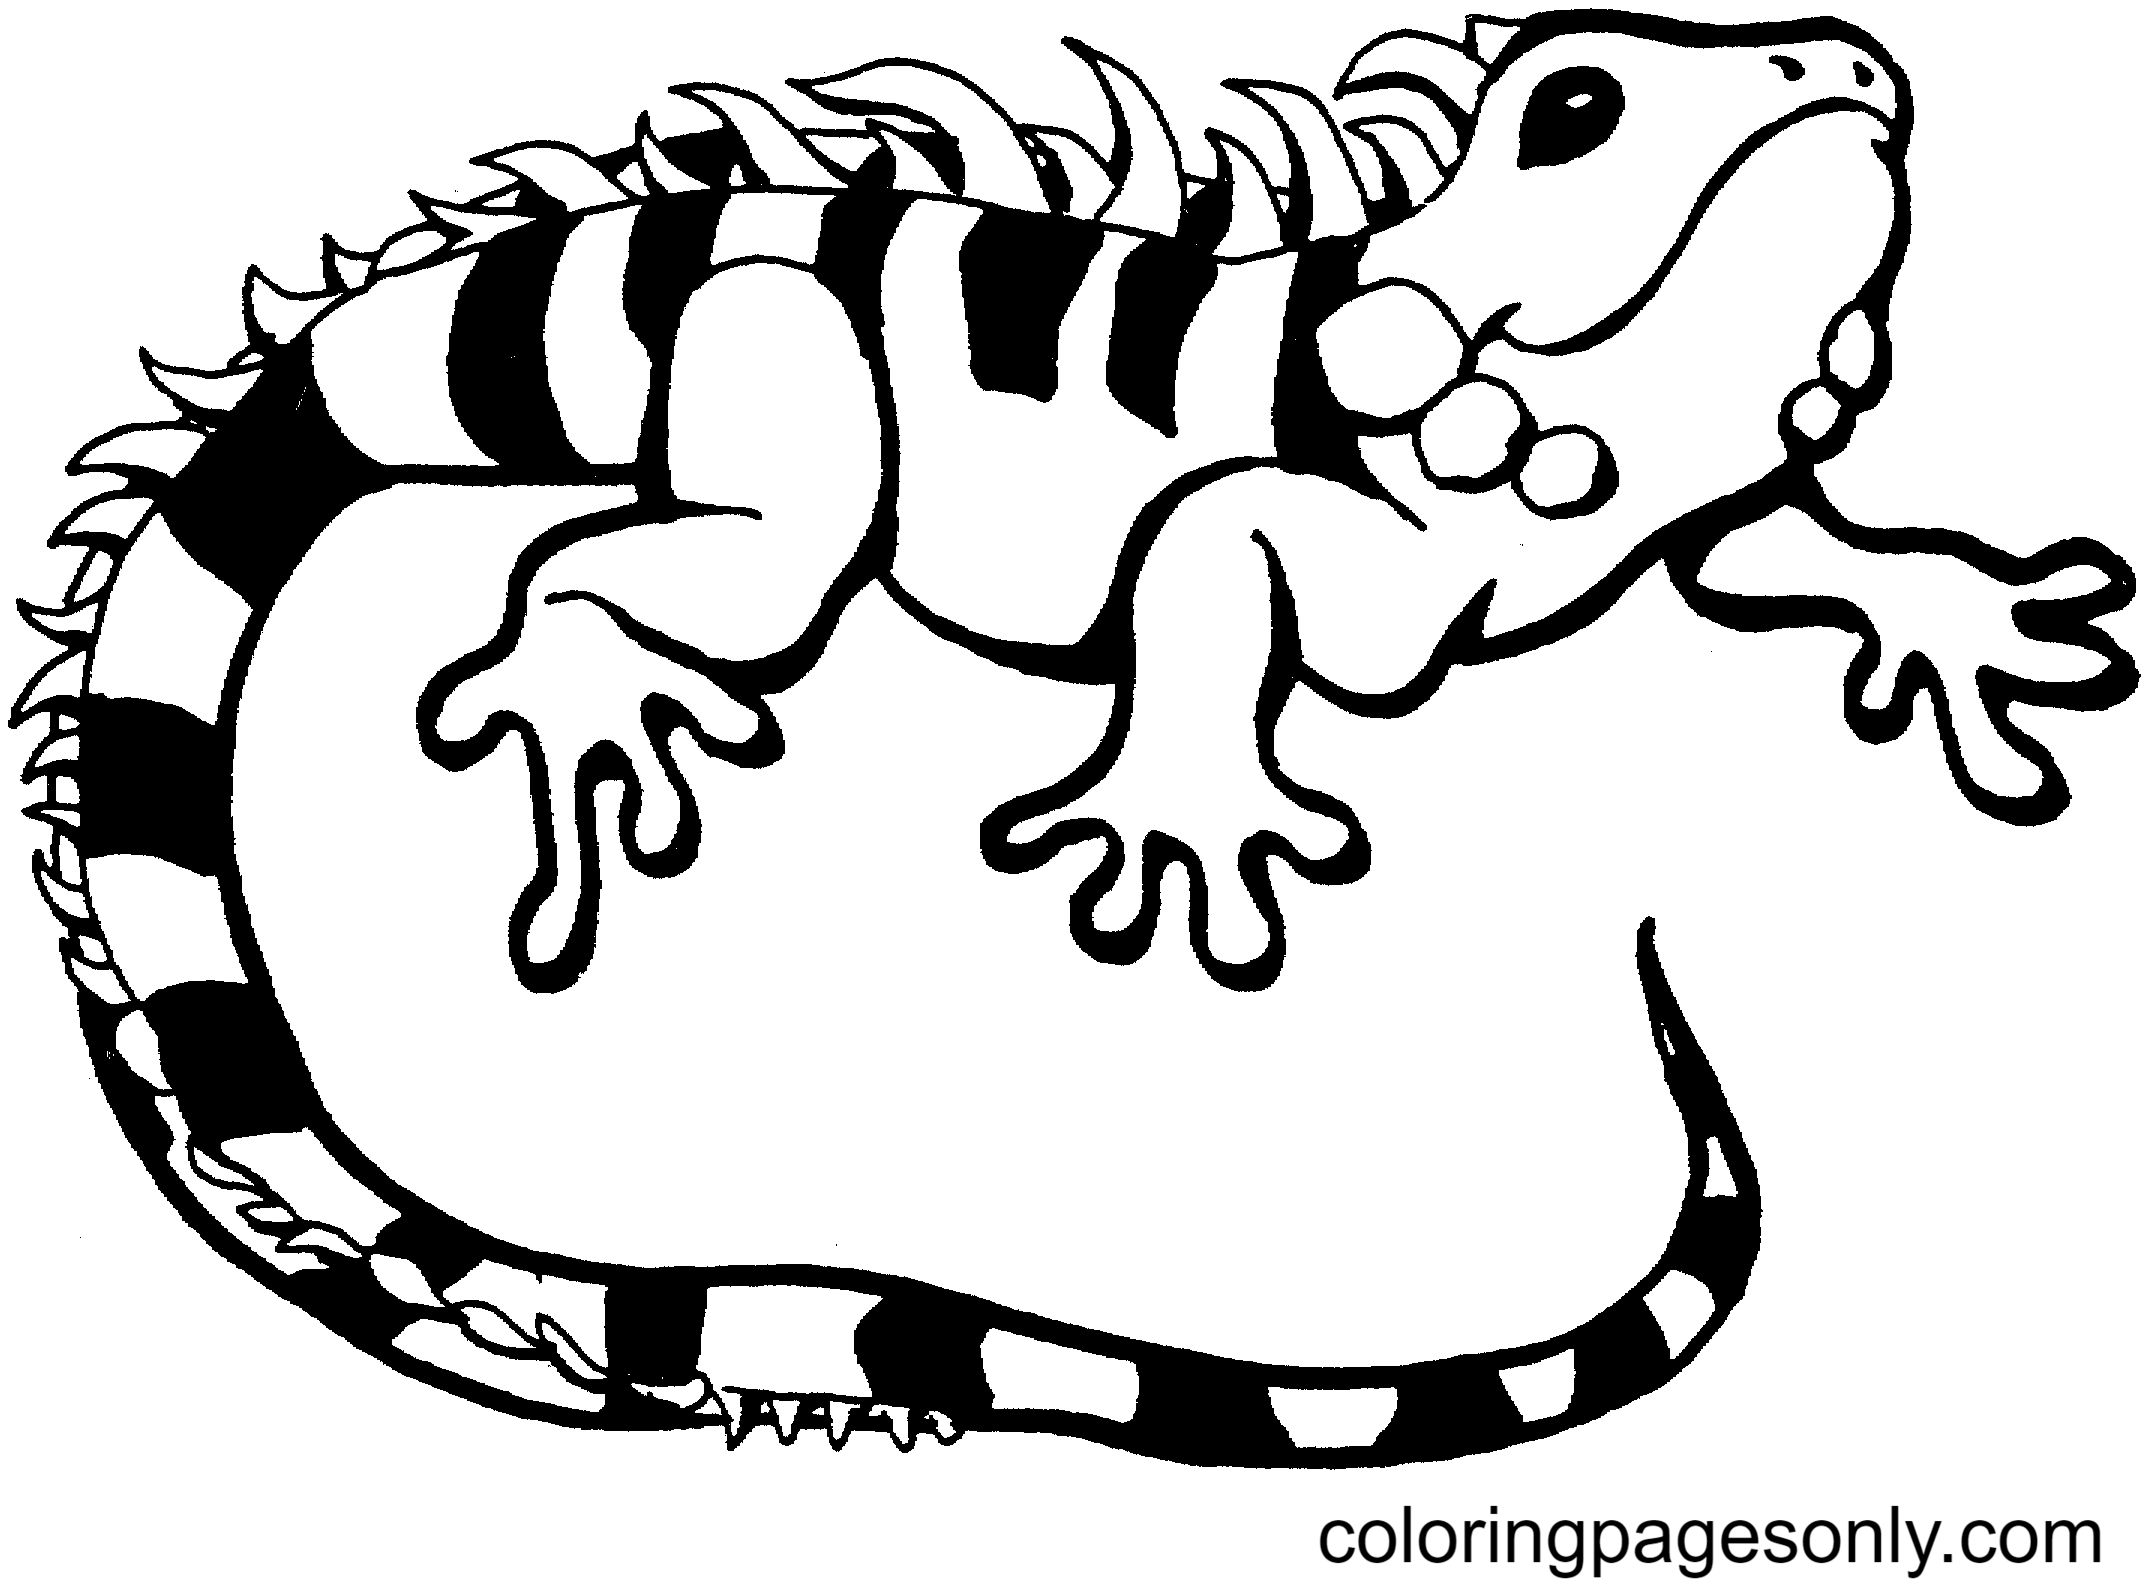 coloring-page-lizard-home-design-ideas